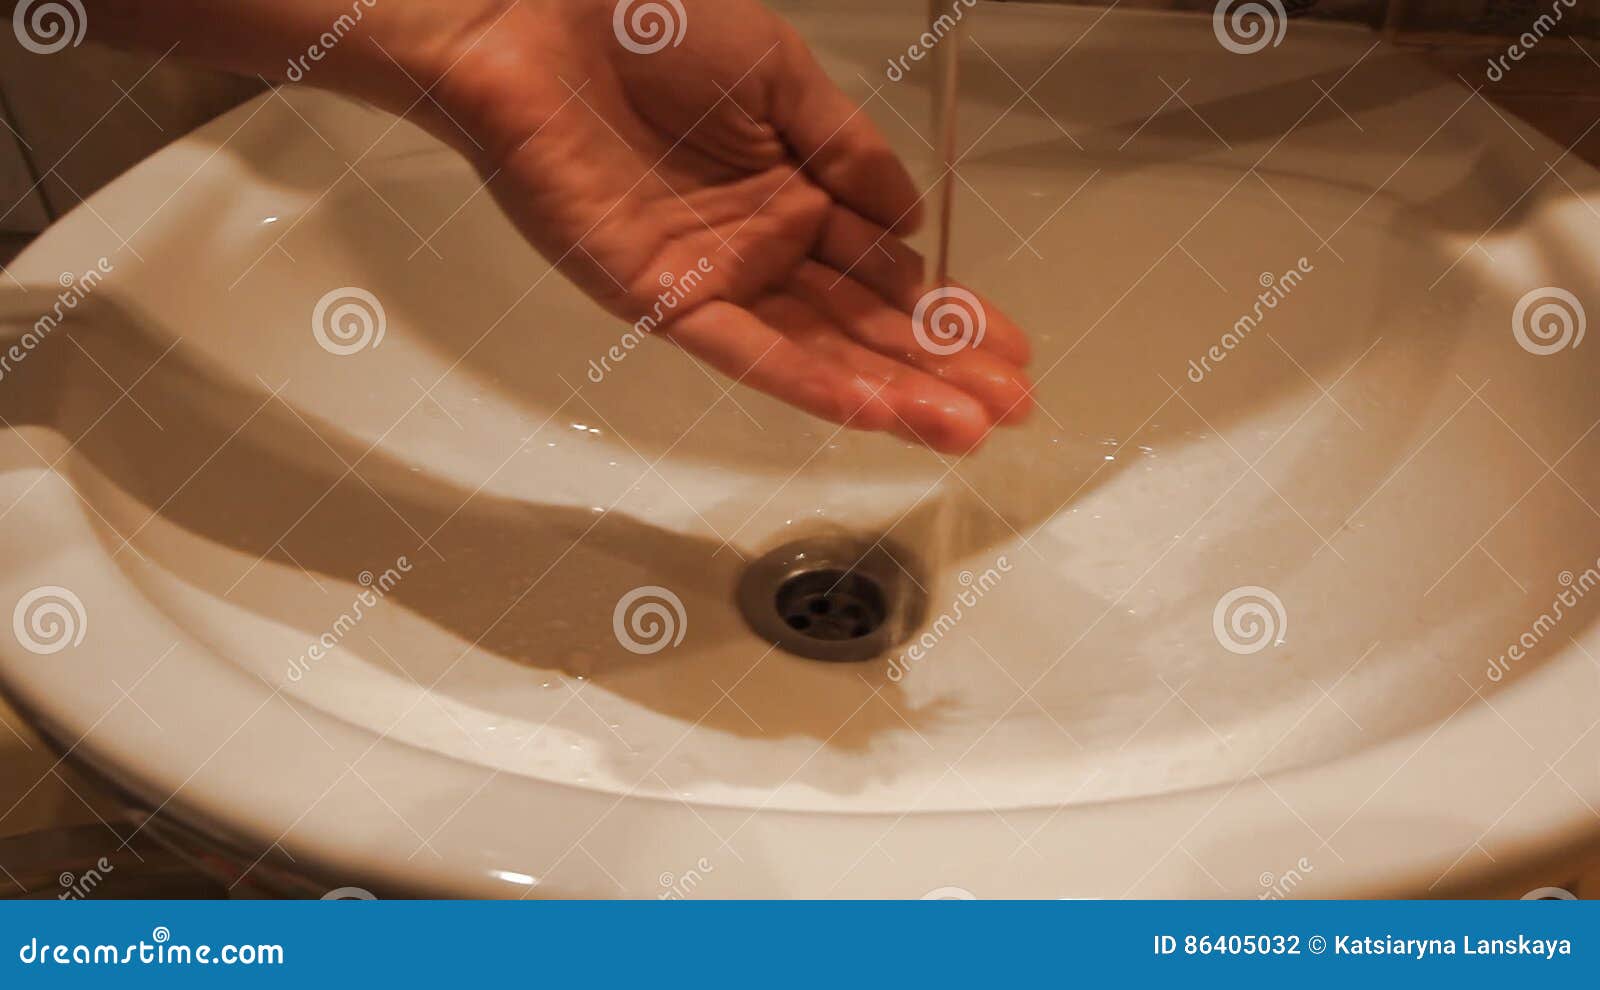 Faucet Water Runs In Sink Starts Out Dirty Rusty Golden Brown